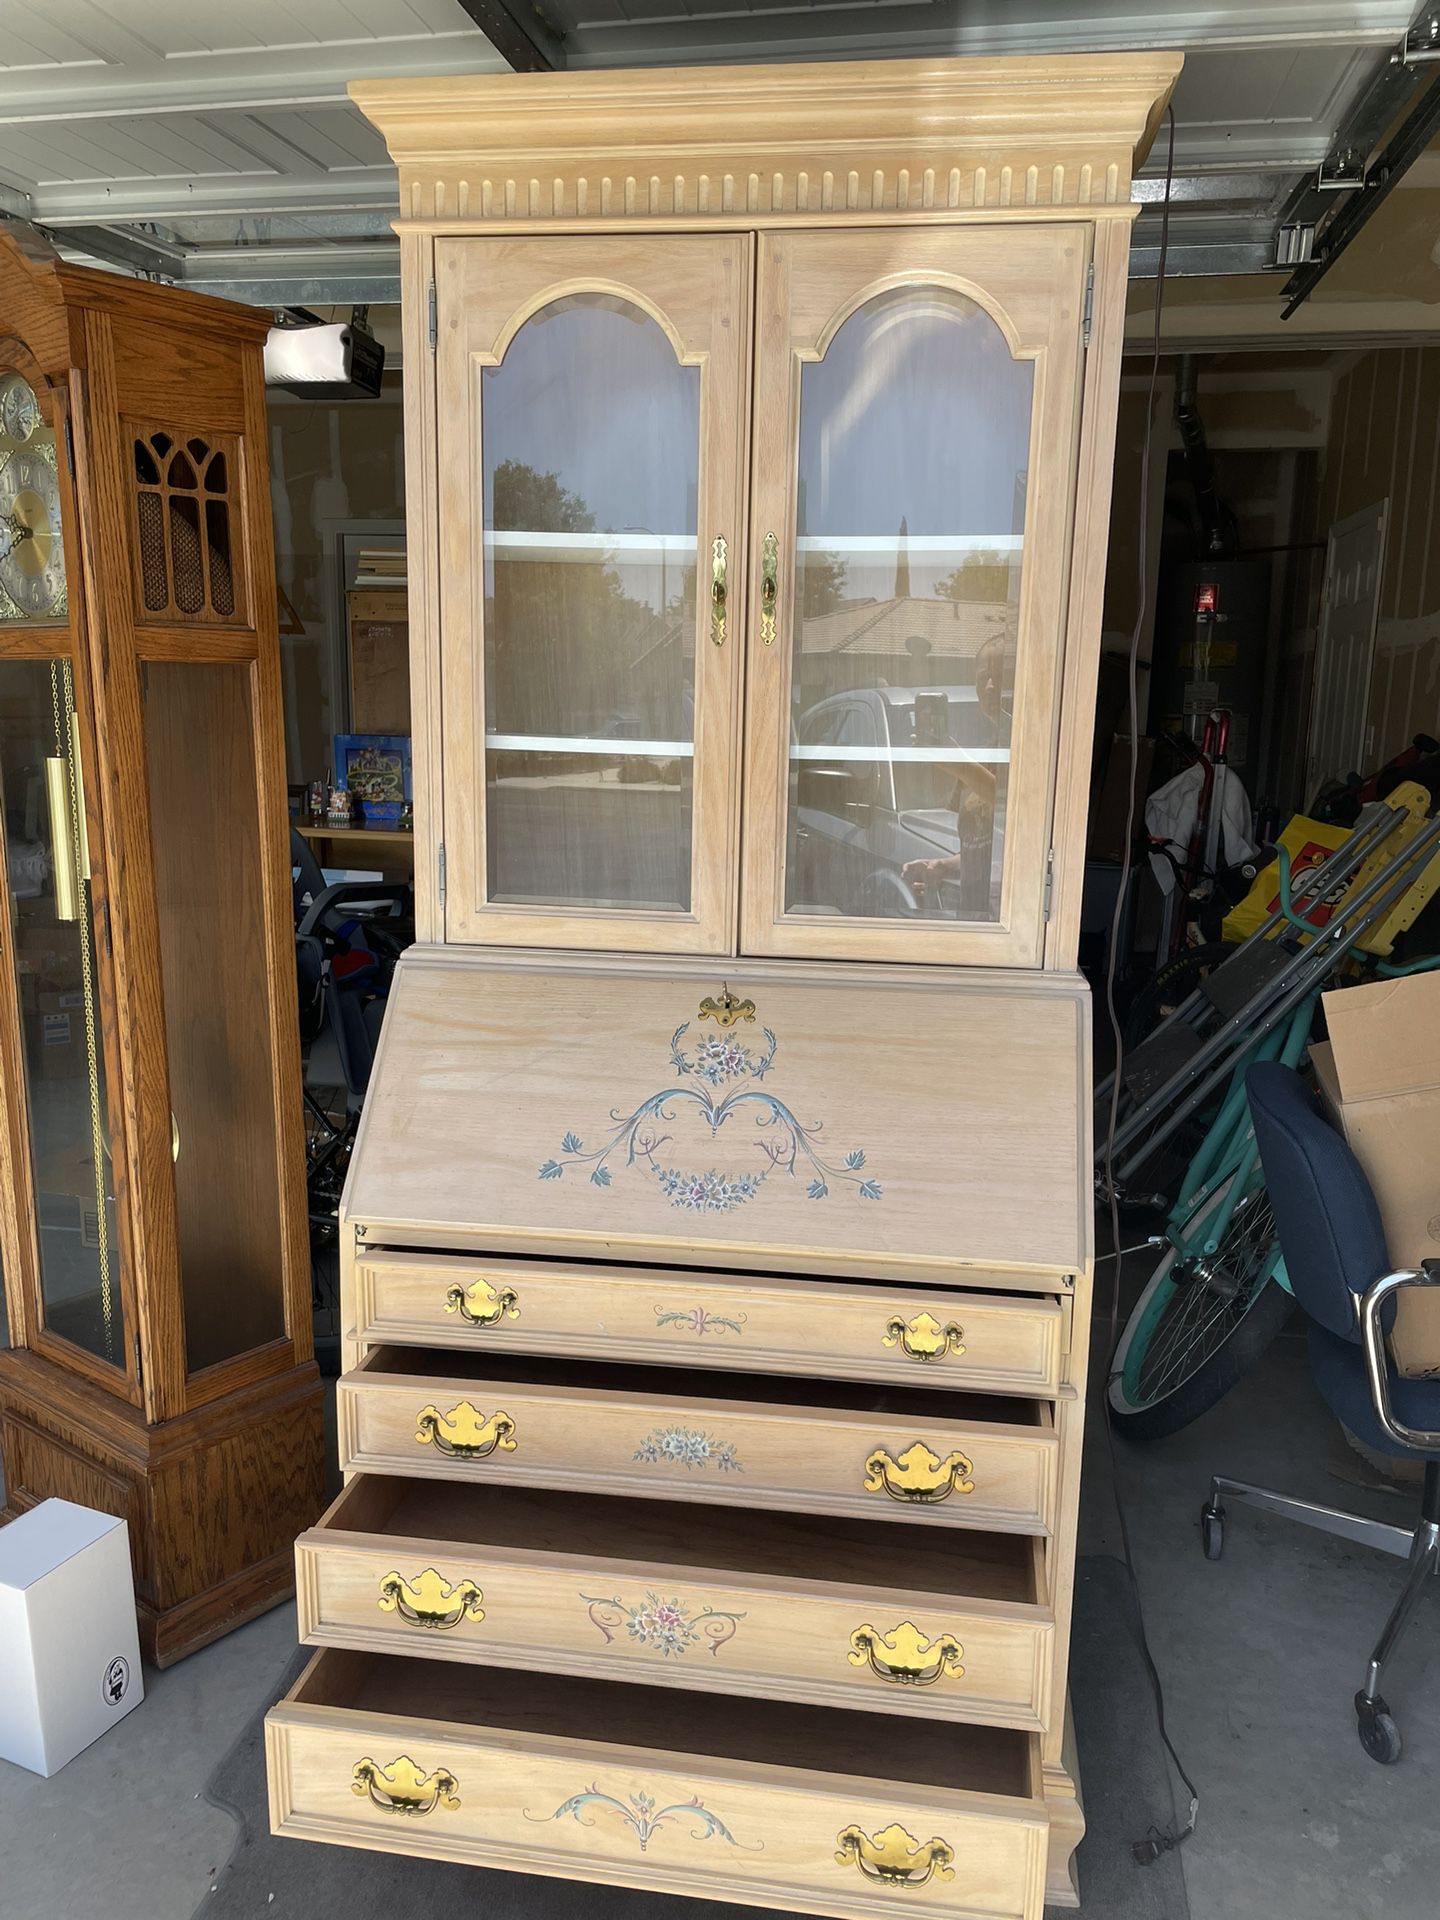 armoire desk with key